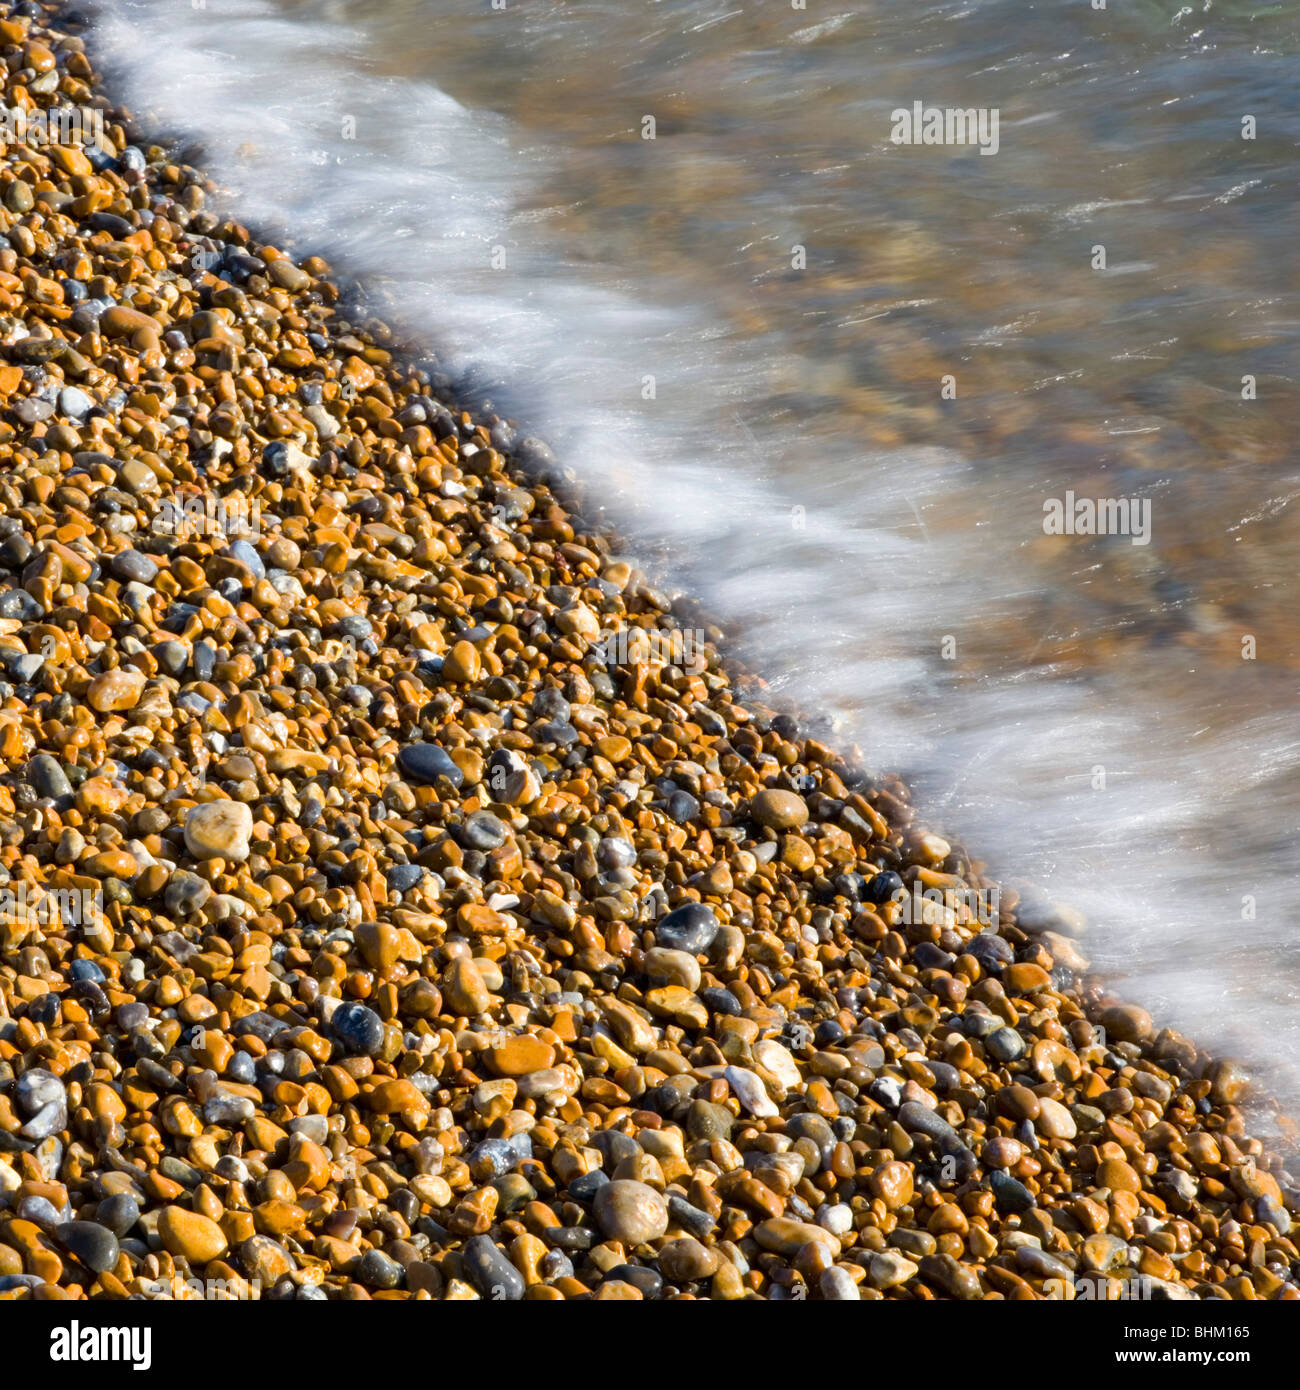 Hastings, East Sussex, England. Sunlit pebbles washed by the incoming tide. Stock Photo